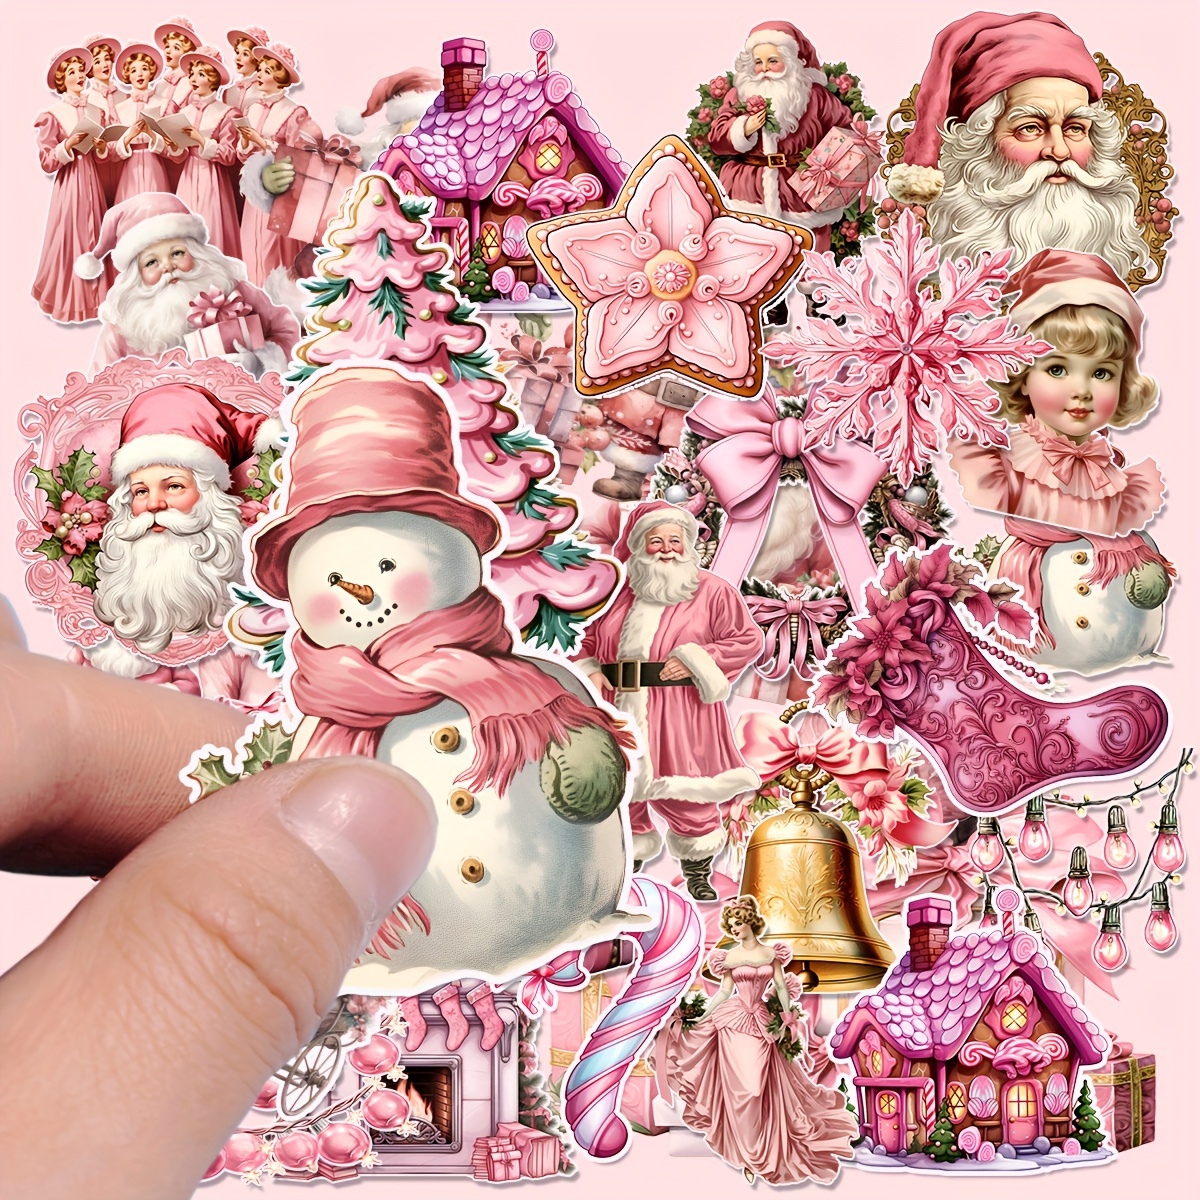 

64pcs Christmas Stickers Pack, Self-adhesive Christmas Bell Stickers.window Decorations Suitable For Diy Hand Account Material, Scrapbooking, Greeting Card, Water Cup, Mobile Phone, Decoration